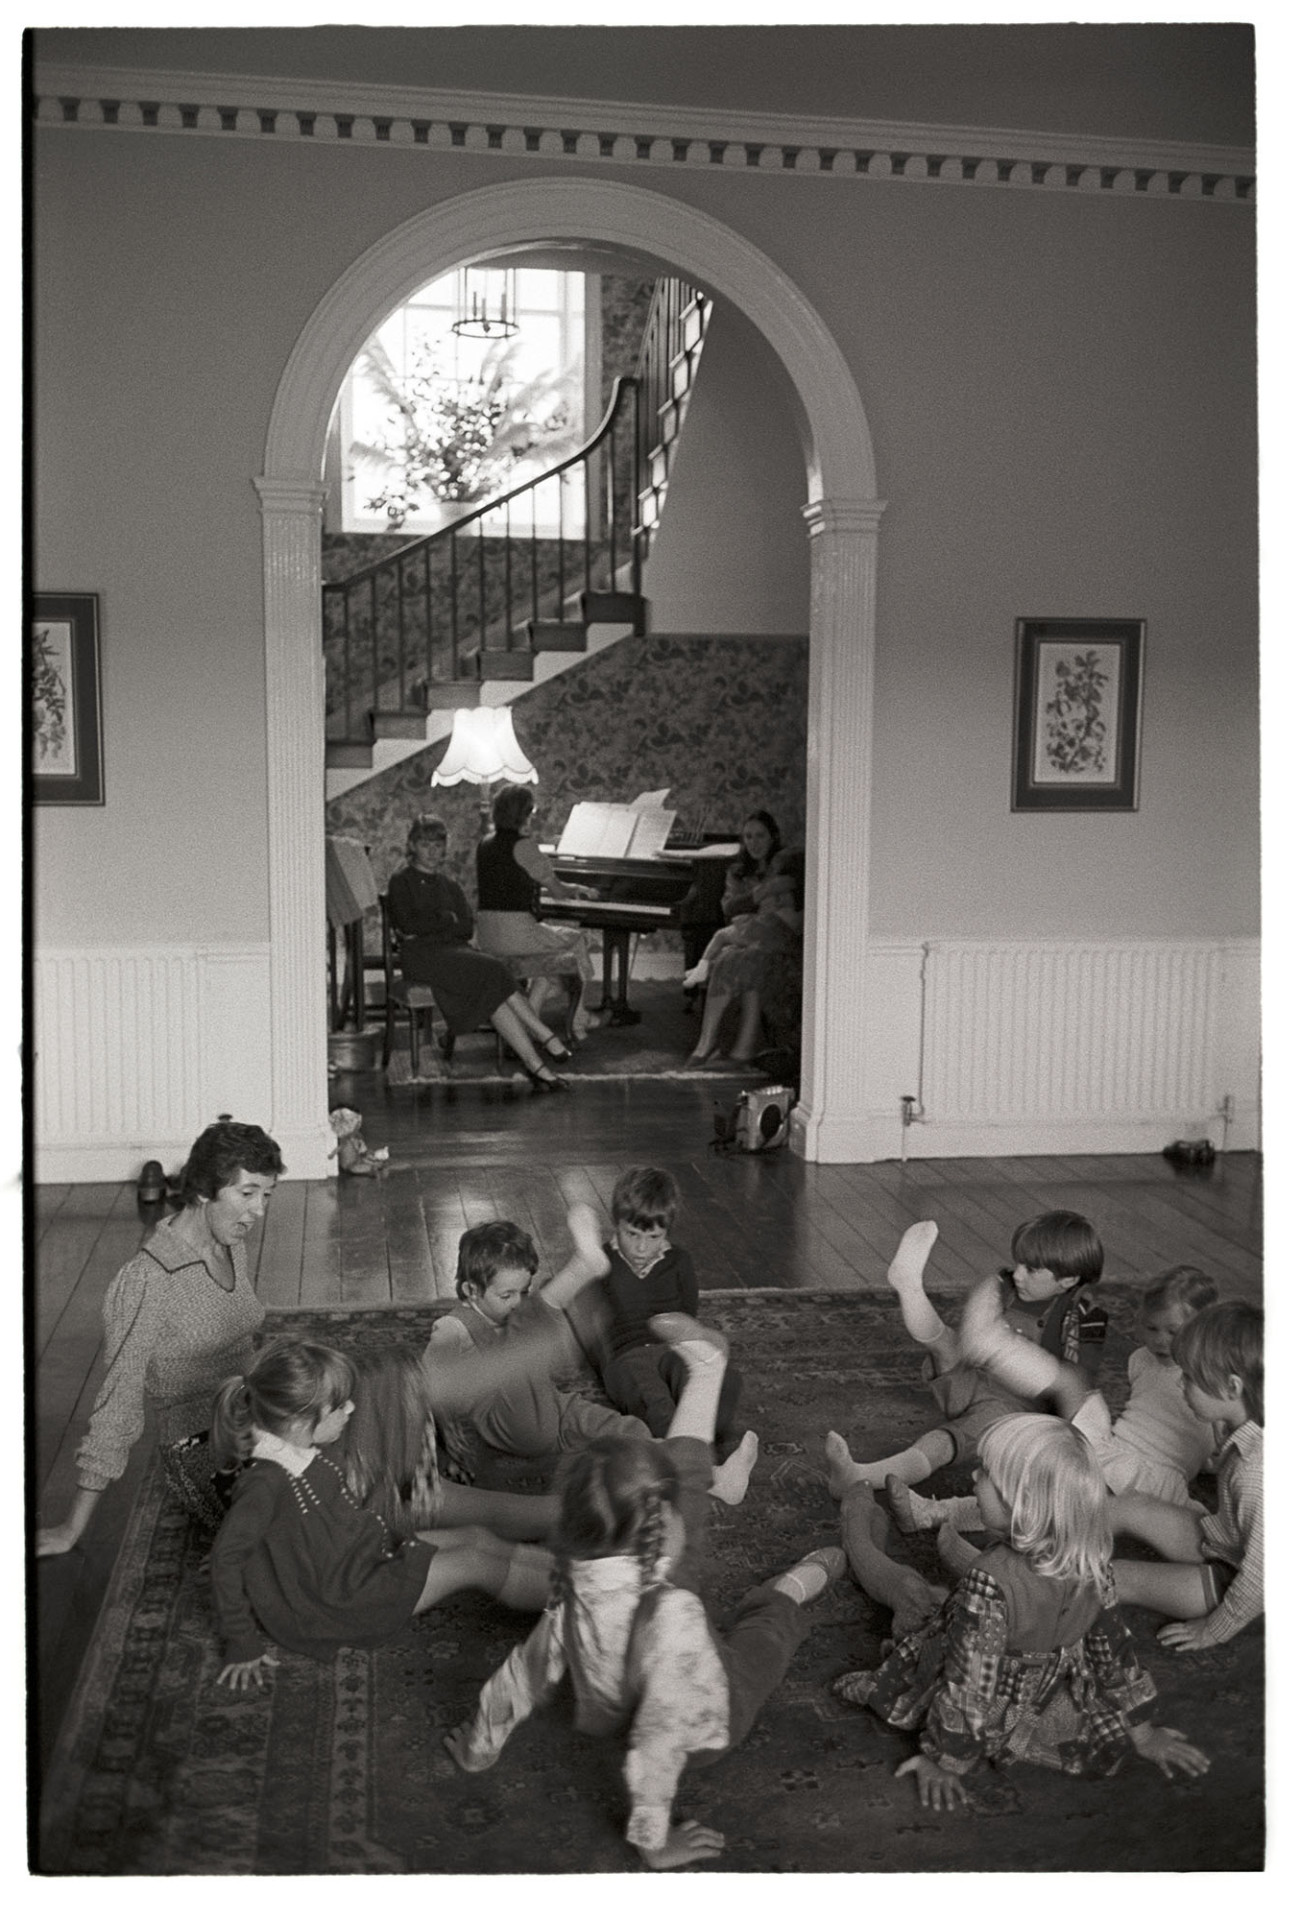 Children's dance class in large country house, teacher. 
[A woman teaching a children's dance class at Marwood House. Through an arched doorway people can be seen watching the dance class by a woman playing a piano.]